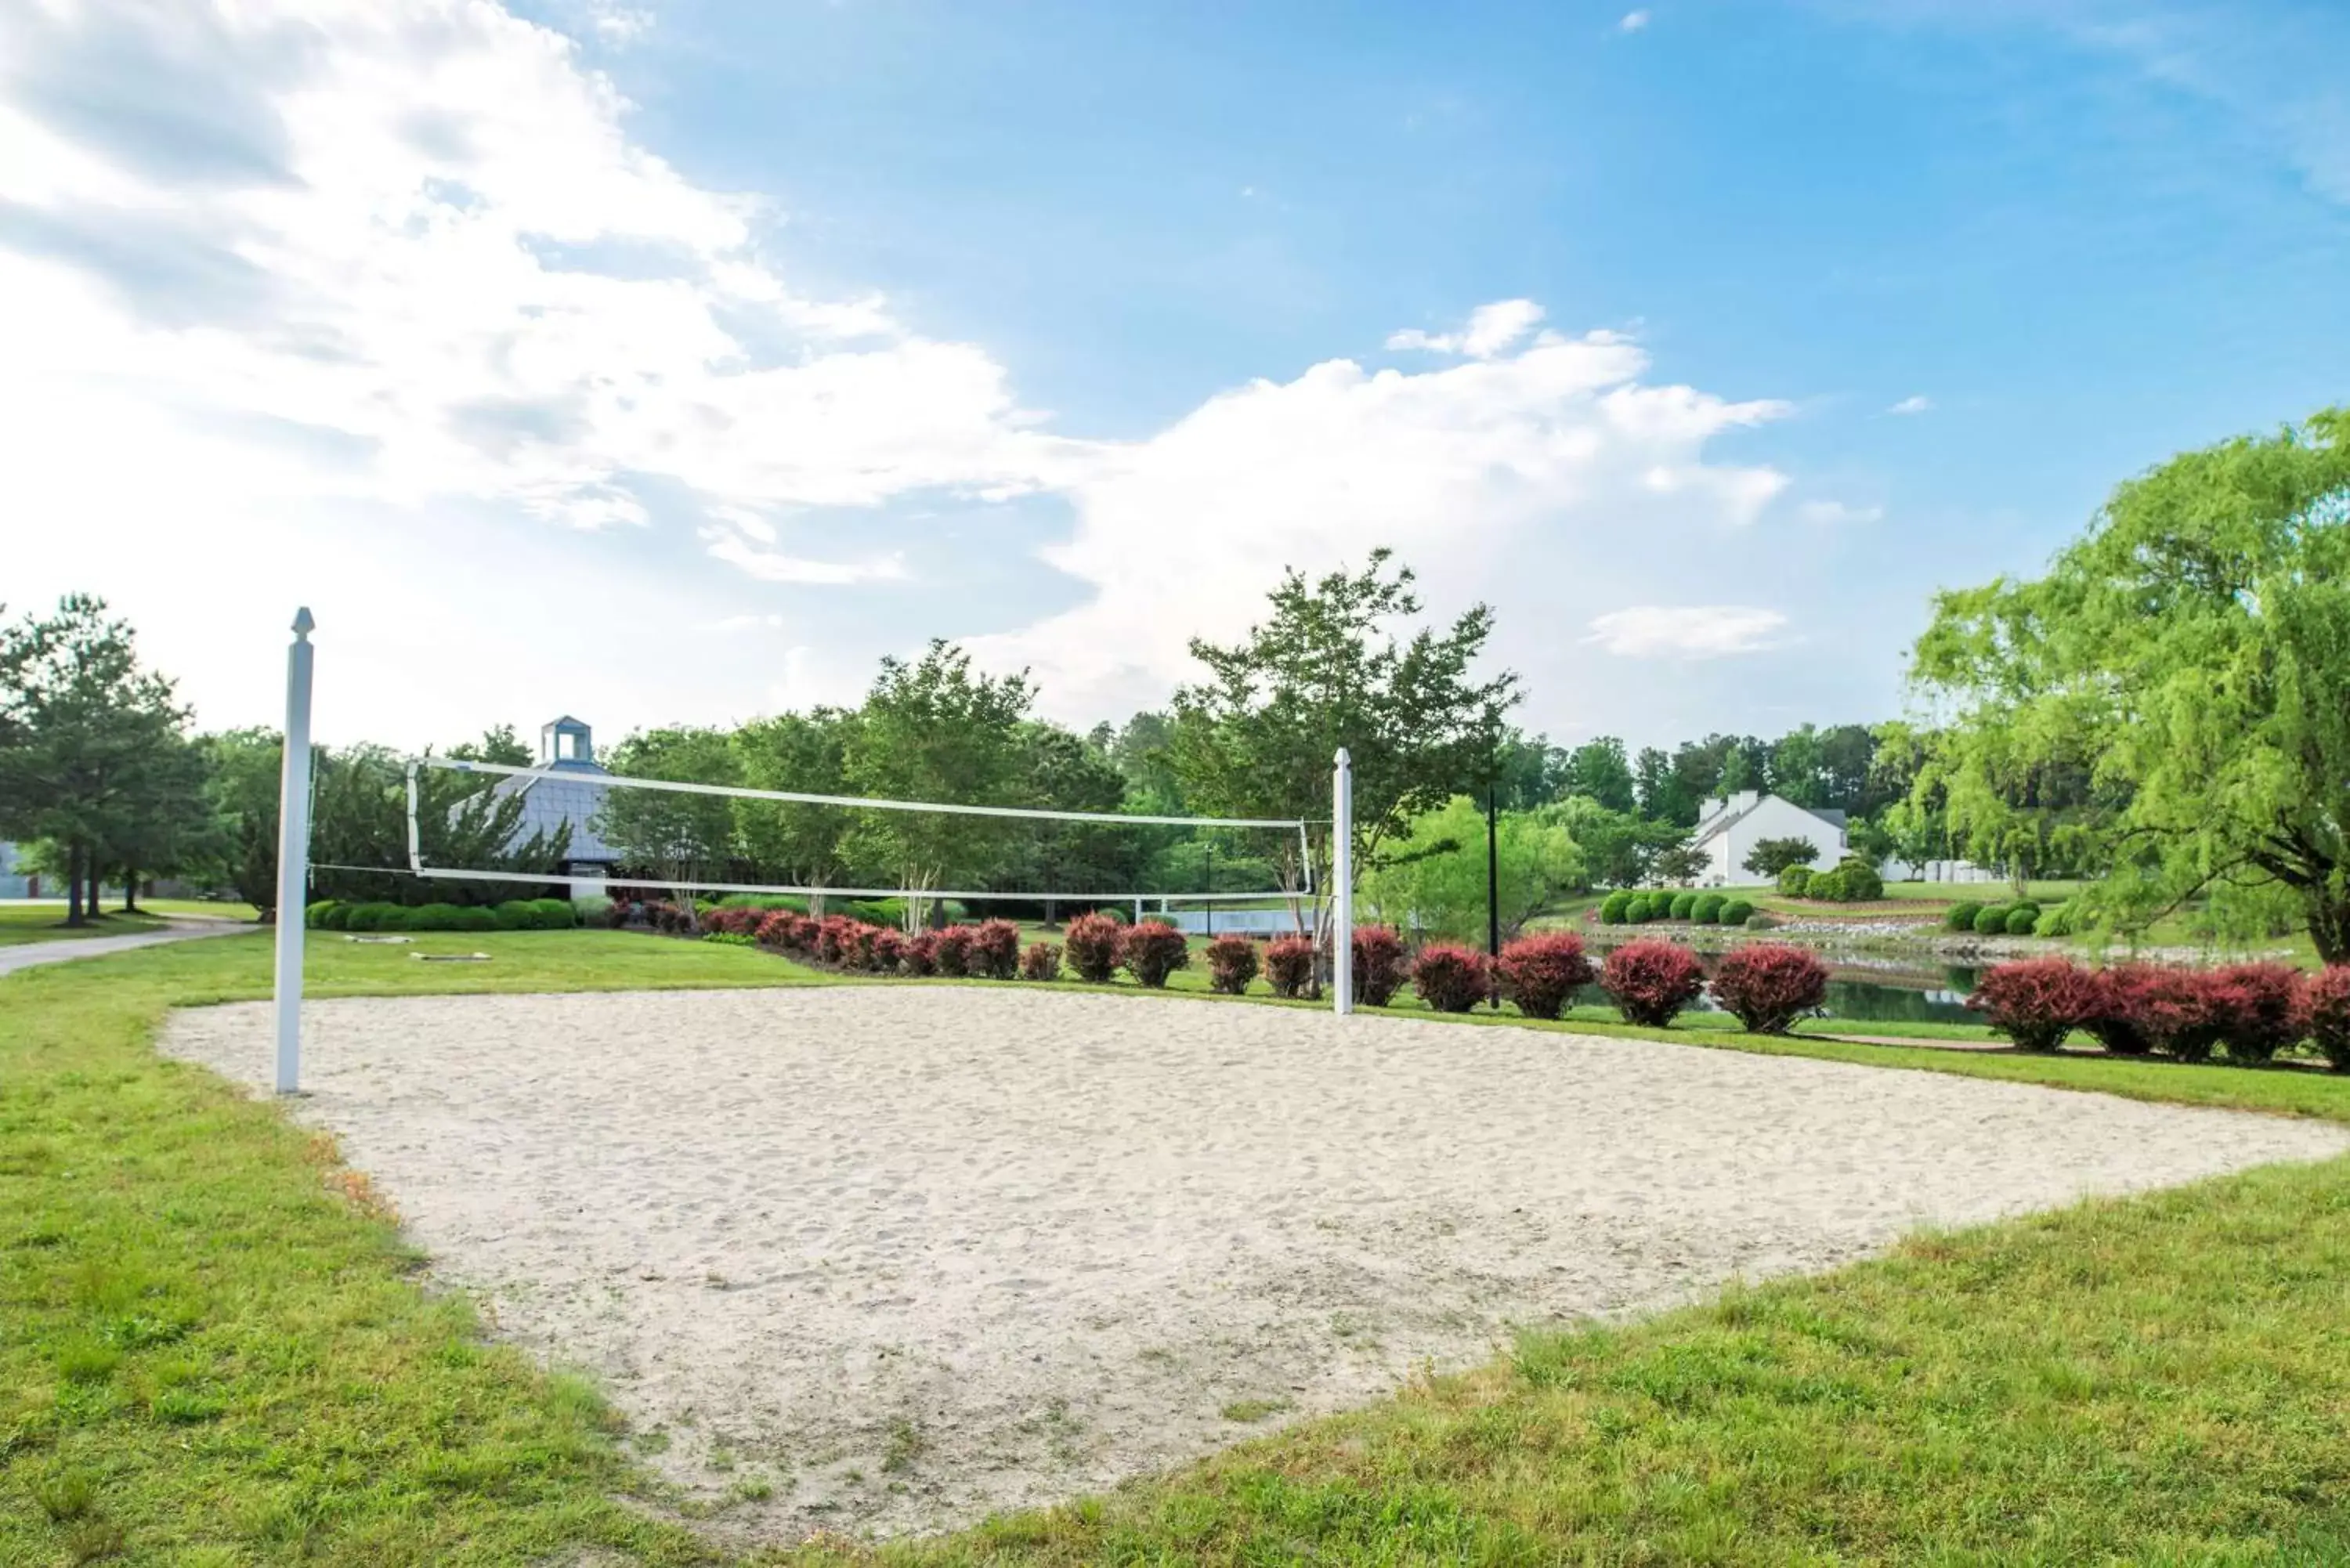 Sports, Other Activities in Hilton Vacation Club The Historic Powhatan Williamsburg